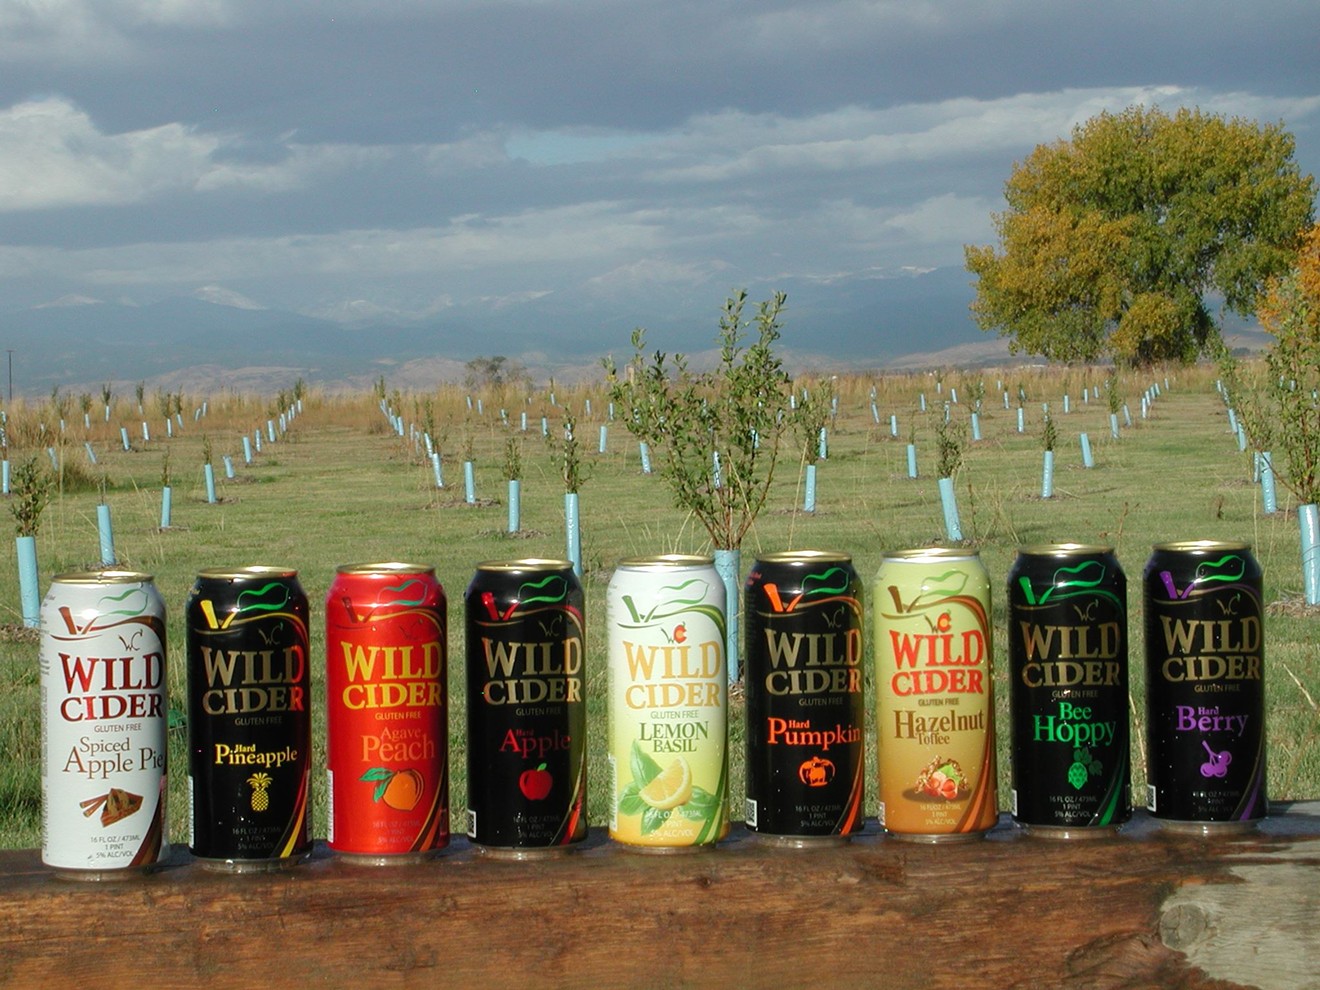 Wild Cider produces less-sugary ciders with unique twists.